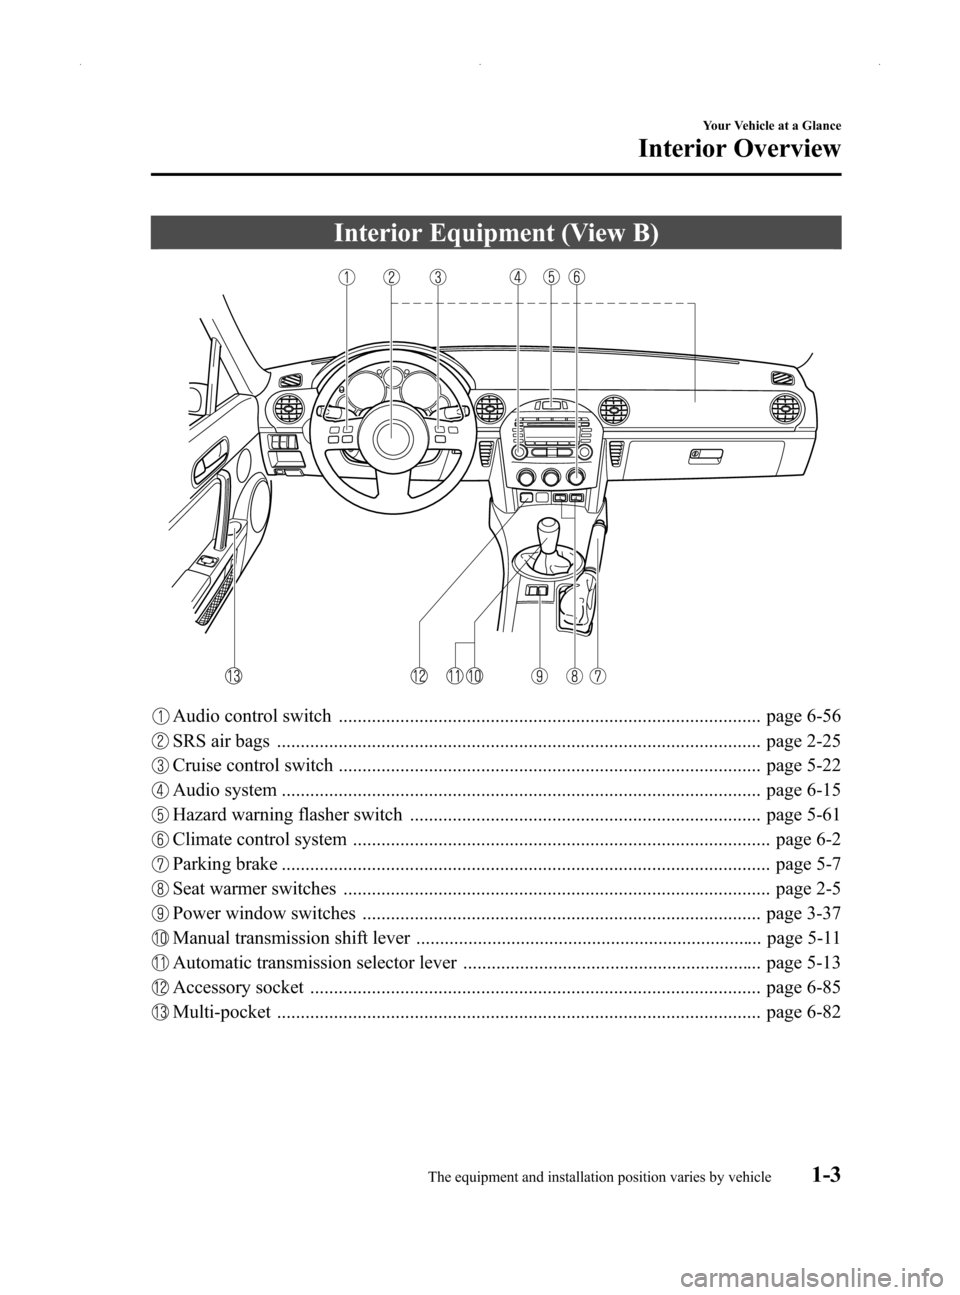 MAZDA MODEL MX-5 2014  Owners Manual (in English) Black plate (9,1)
Interior Equipment (View B)
Audio control switch ......................................................................................... page 6-56
SRS air bags ....................